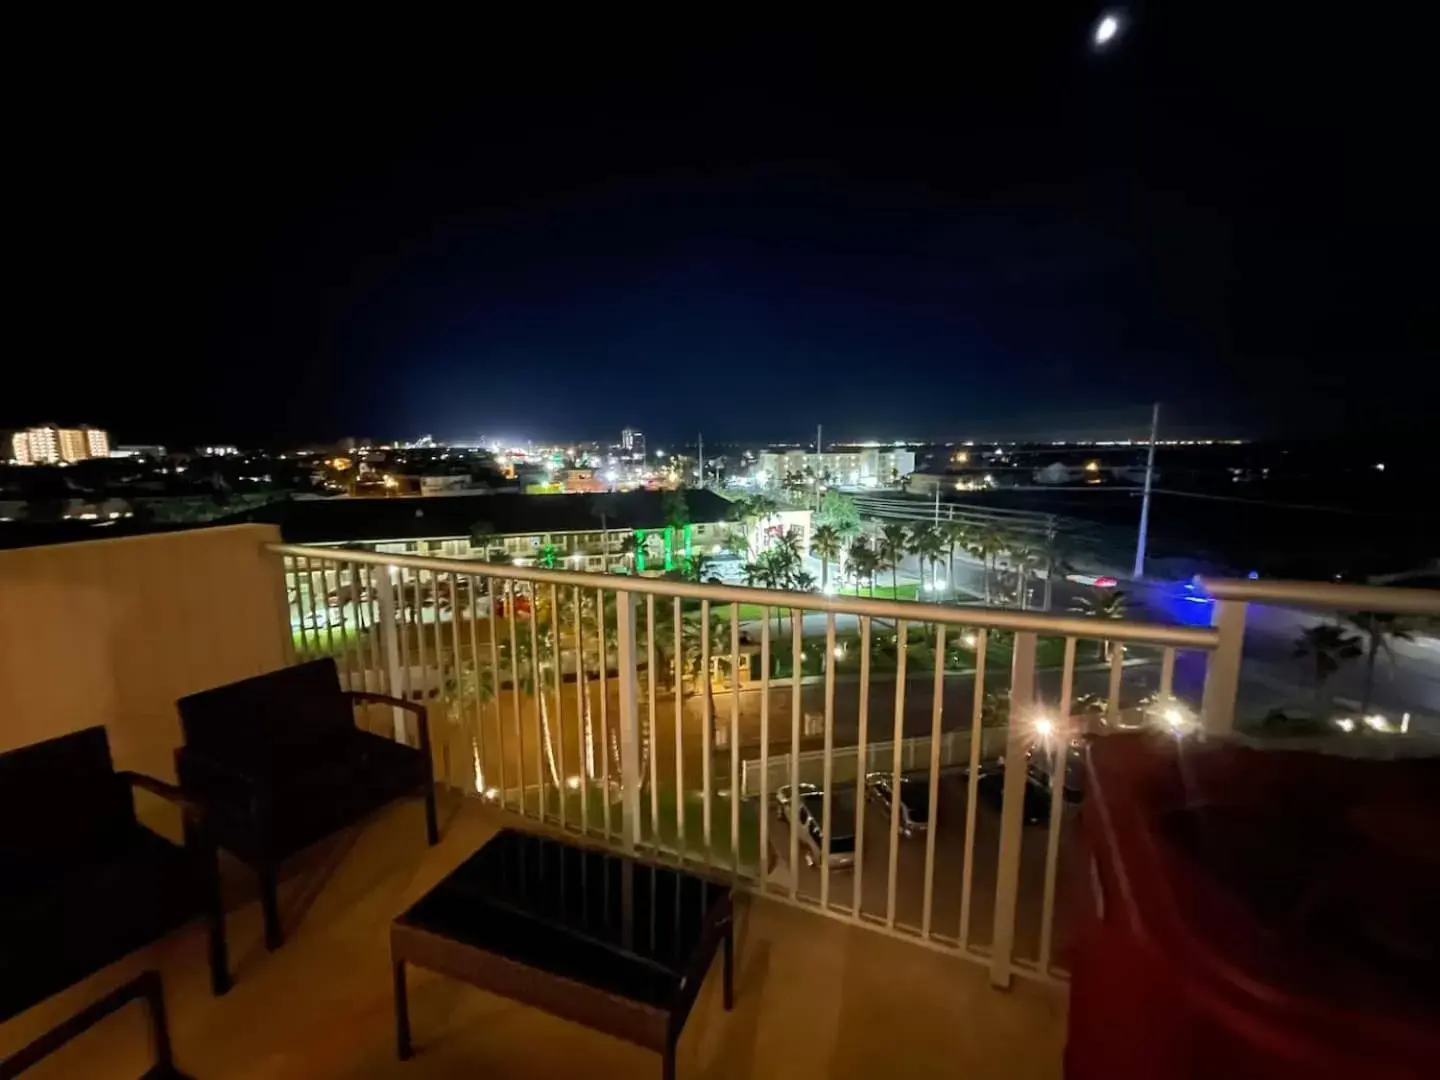 Balcony/Terrace in Bahia Mar Solare Tower 6th floor Bayview Condo 2bd 2ba with Pools and Hot tubs